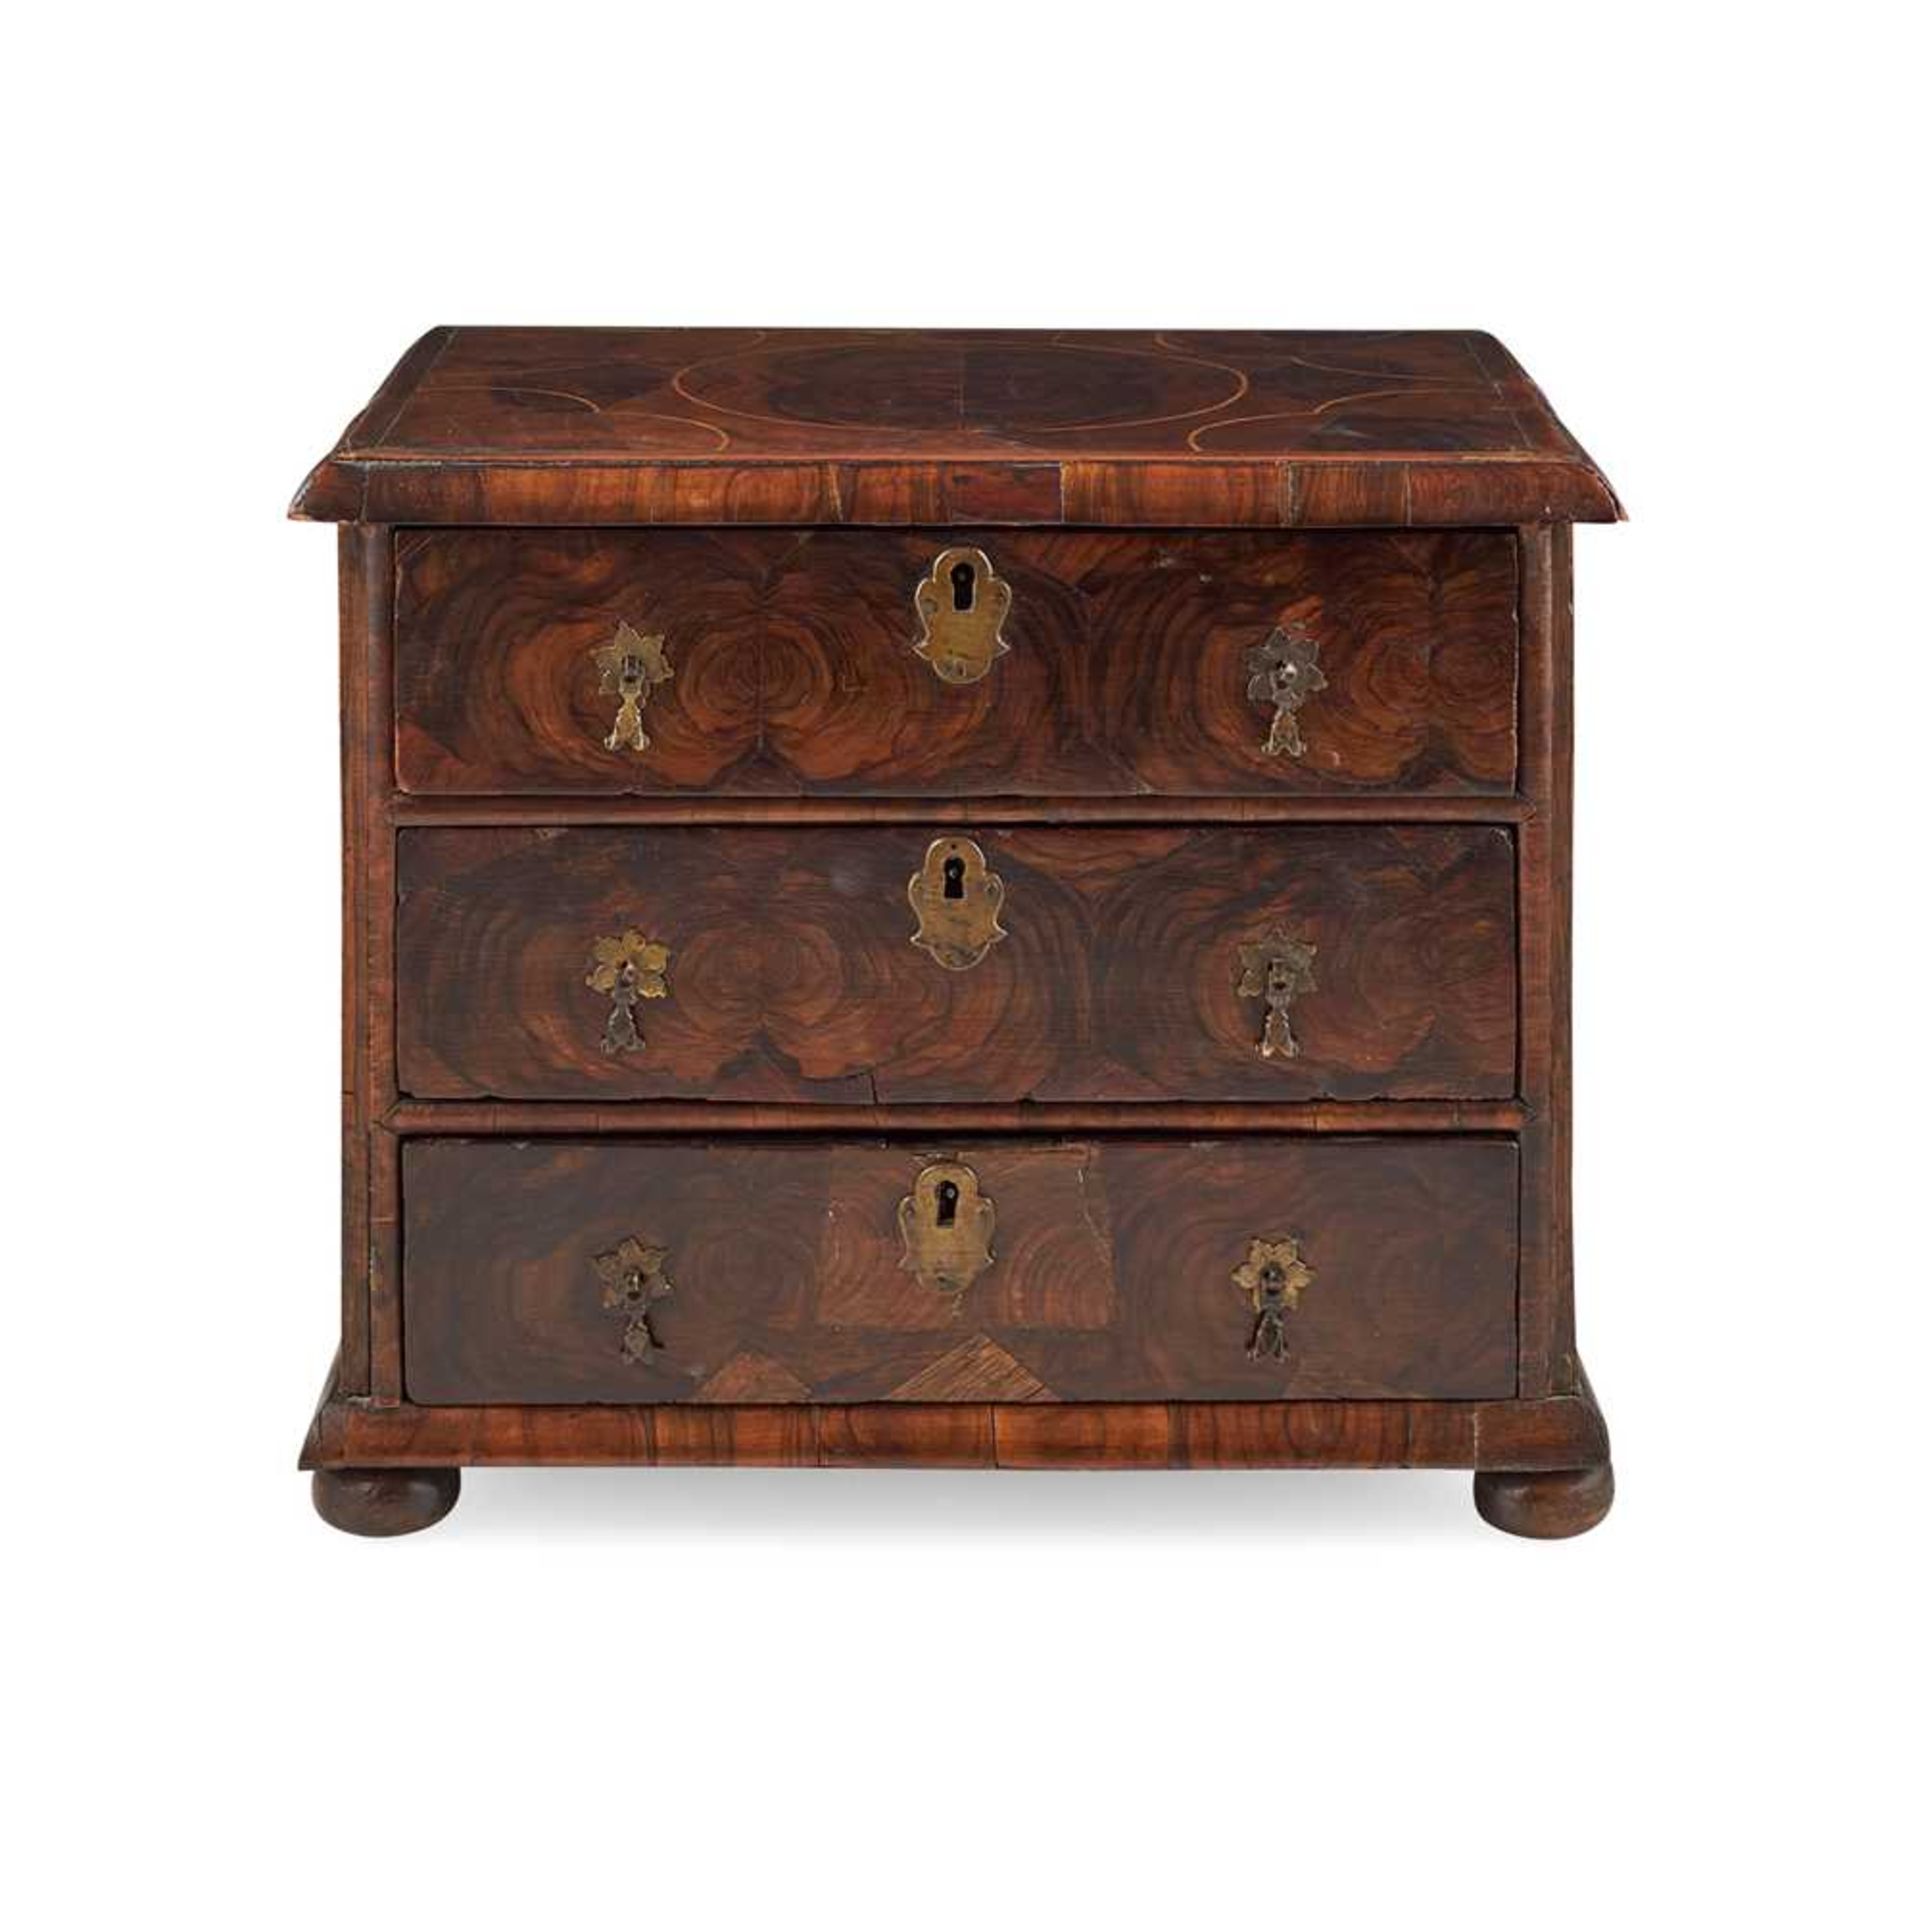 WILLIAM AND MARY OYSTER VENEERED MINIATURE CHEST OF DRAWERS LATE 17TH CENTURY